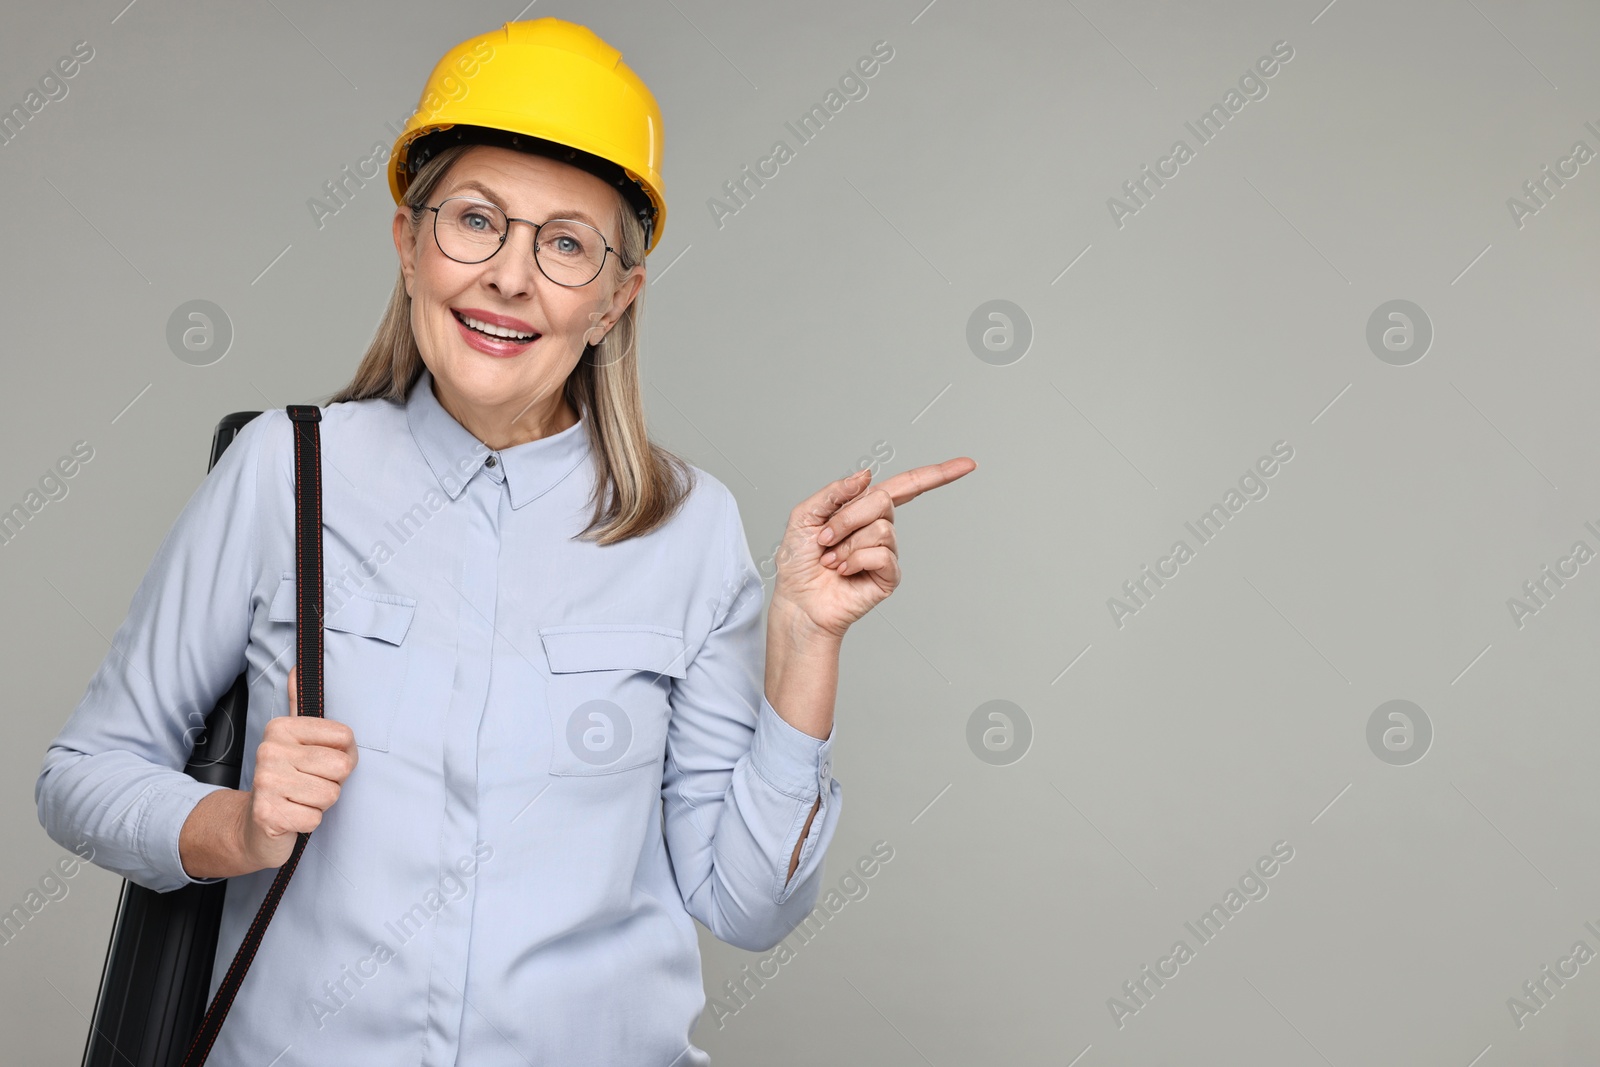 Photo of Architect in hard hat with tube pointing at something on grey background, space for text